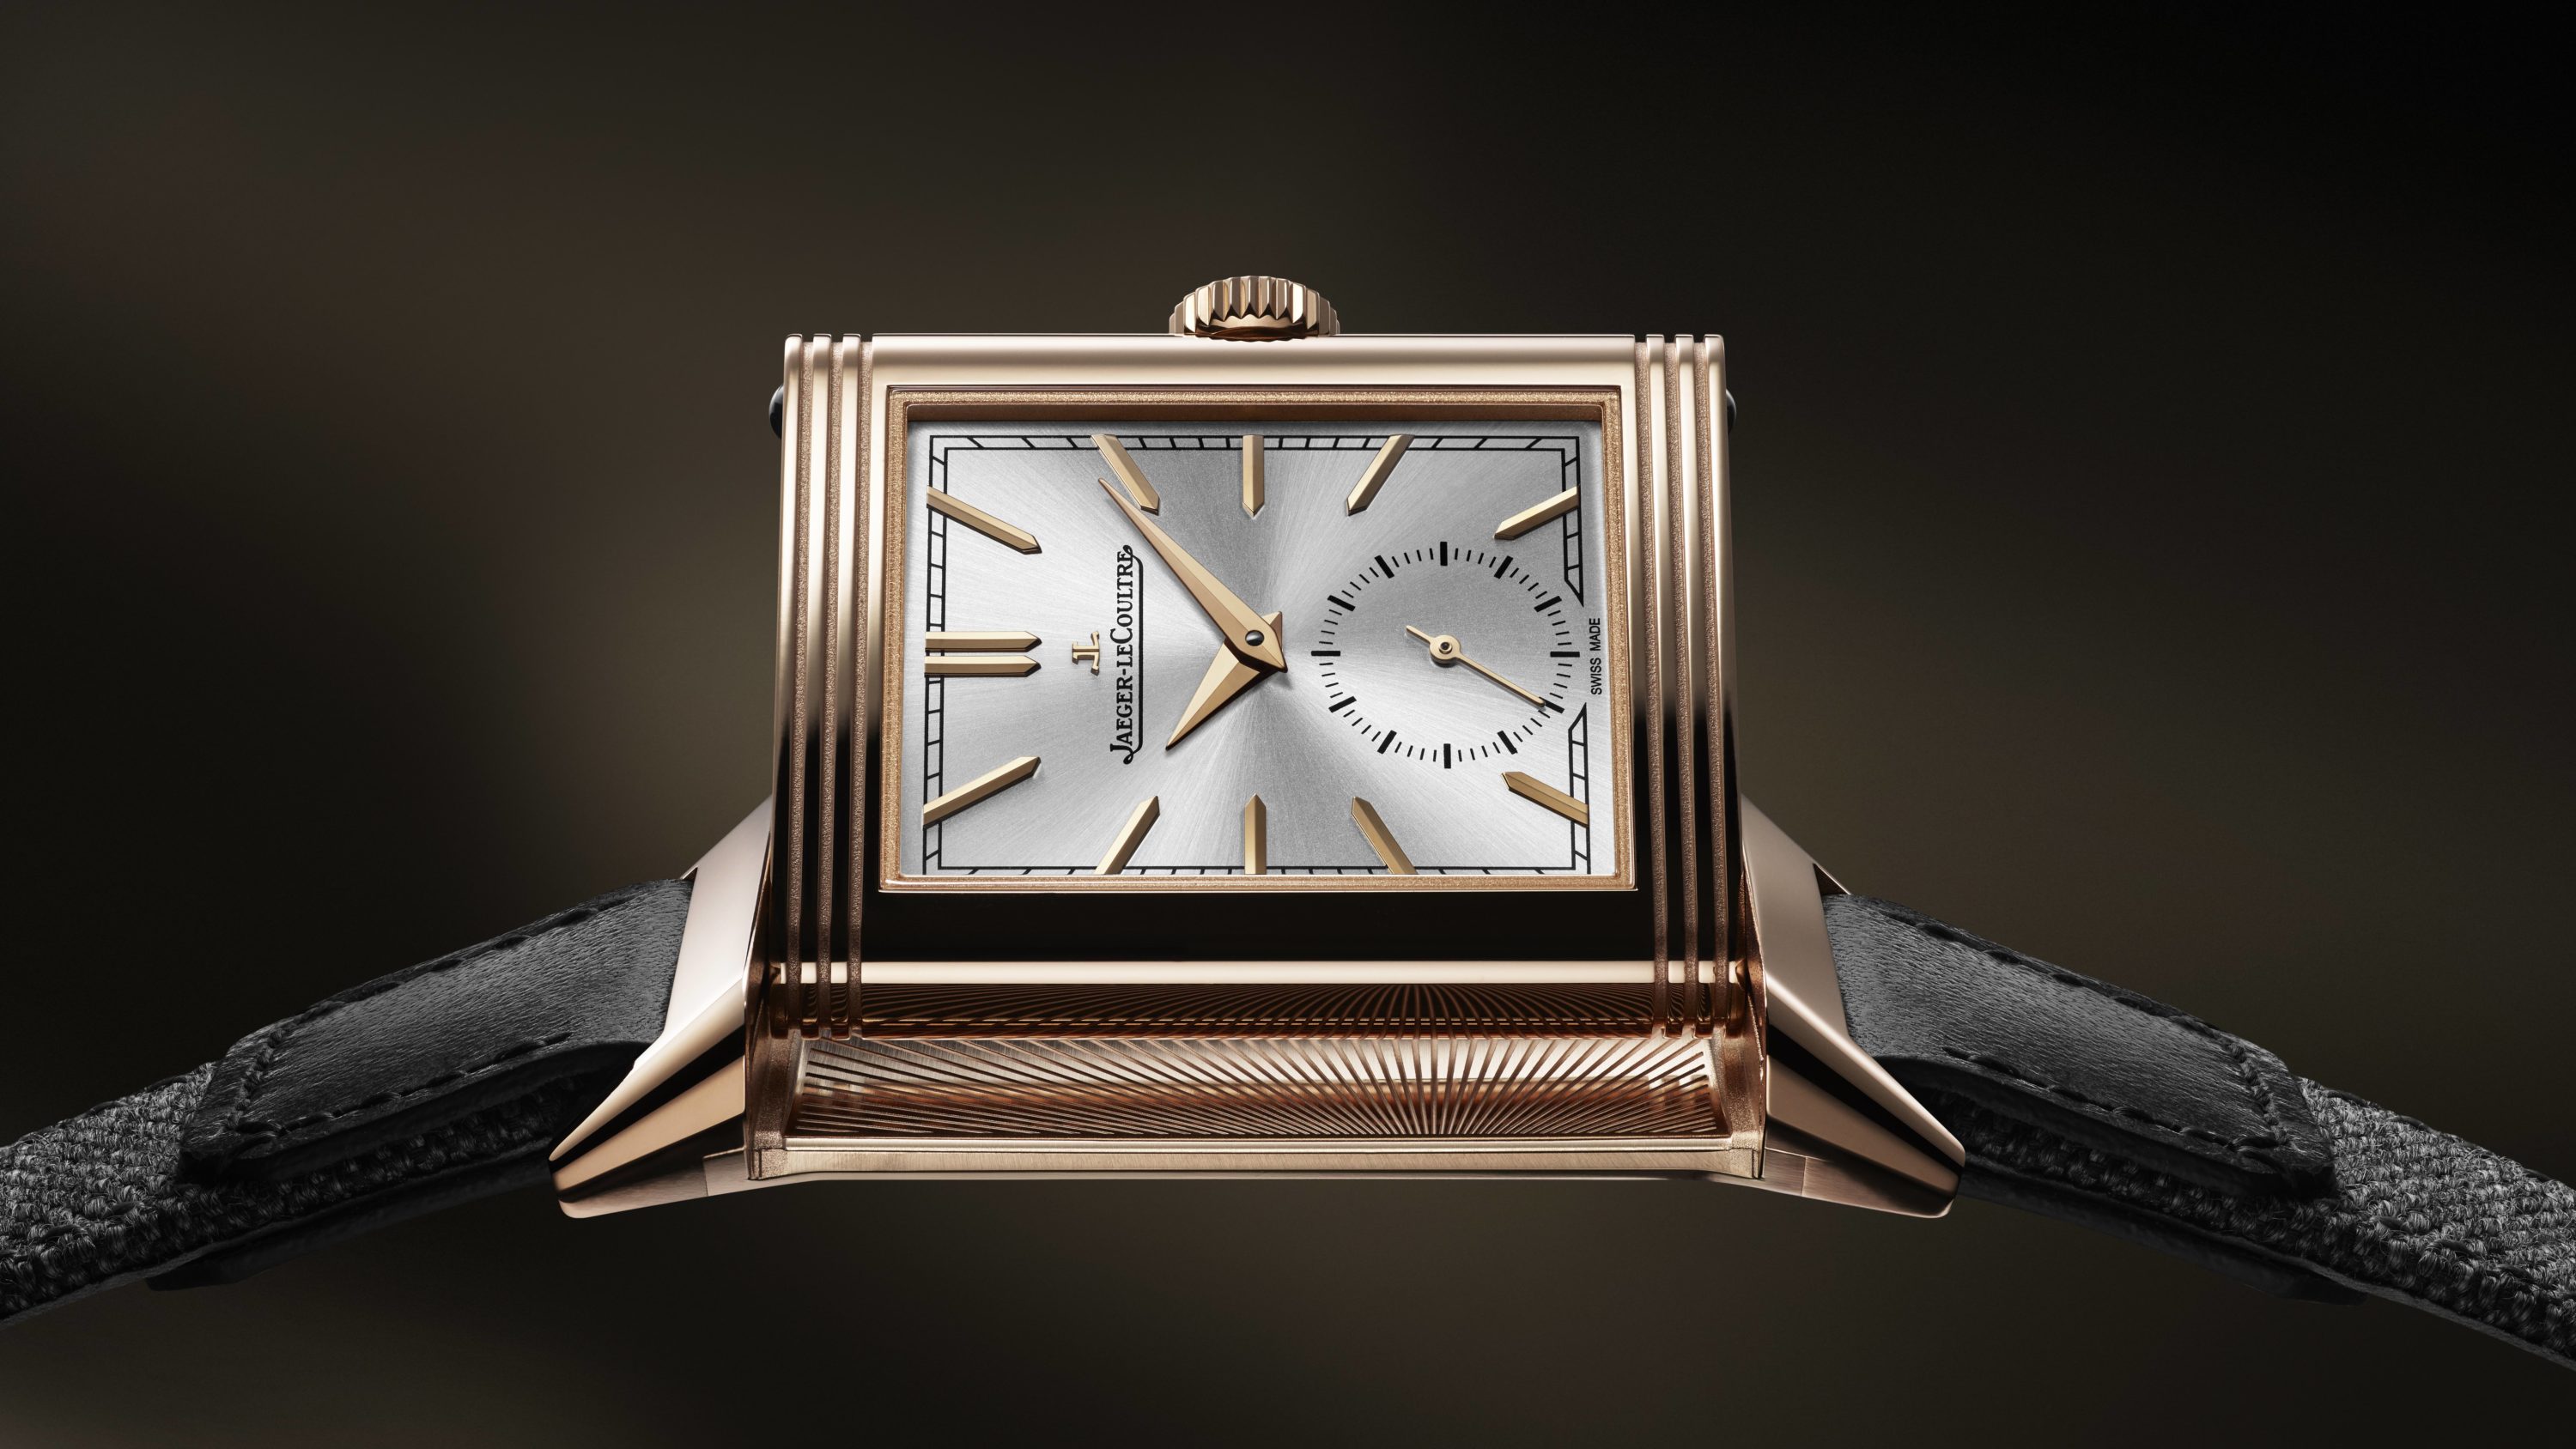 Jaeger-LeCoultre Delights with New Variants of the Reverso Tribute Small Seconds